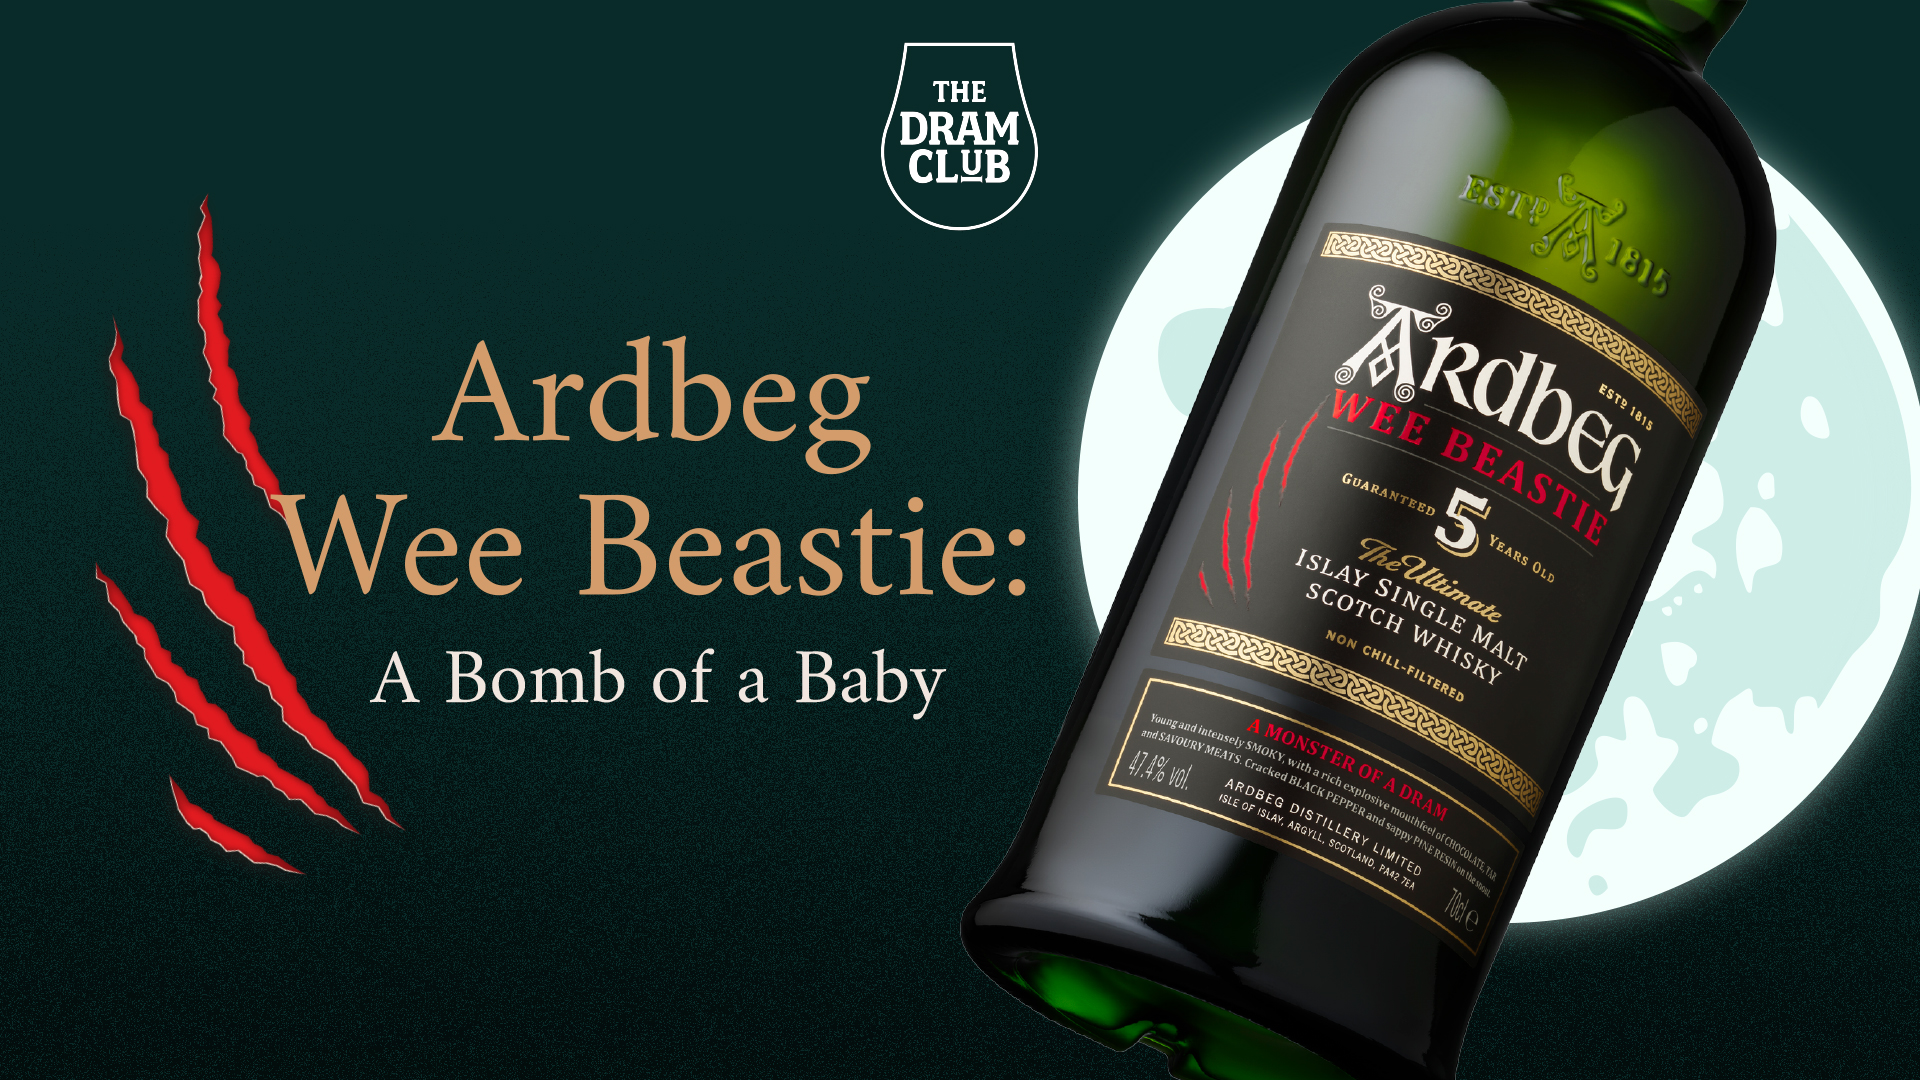 Ardbeg Wee Beastie: A Bomb of a Baby